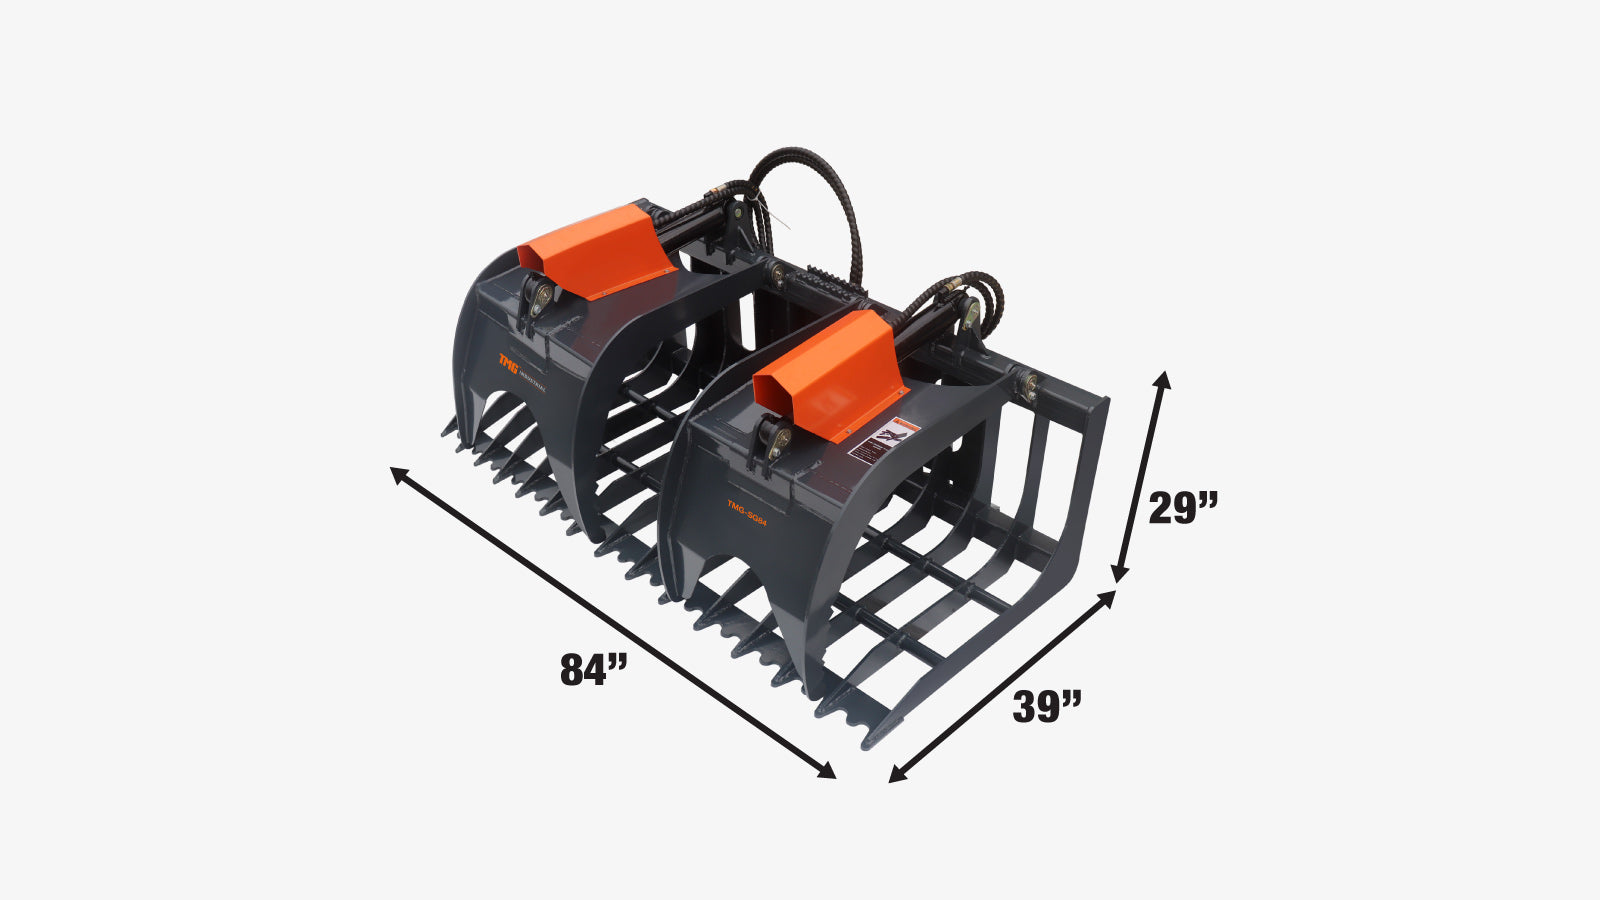 TMG Industrial 84” Skid Steer Rock Skeleton Grapple Attachment, Universal Mount, 36” Arm Opening, 6” Tine Spacing, 2500 lb Weight Capacity, TMG-SG84-specifications-image